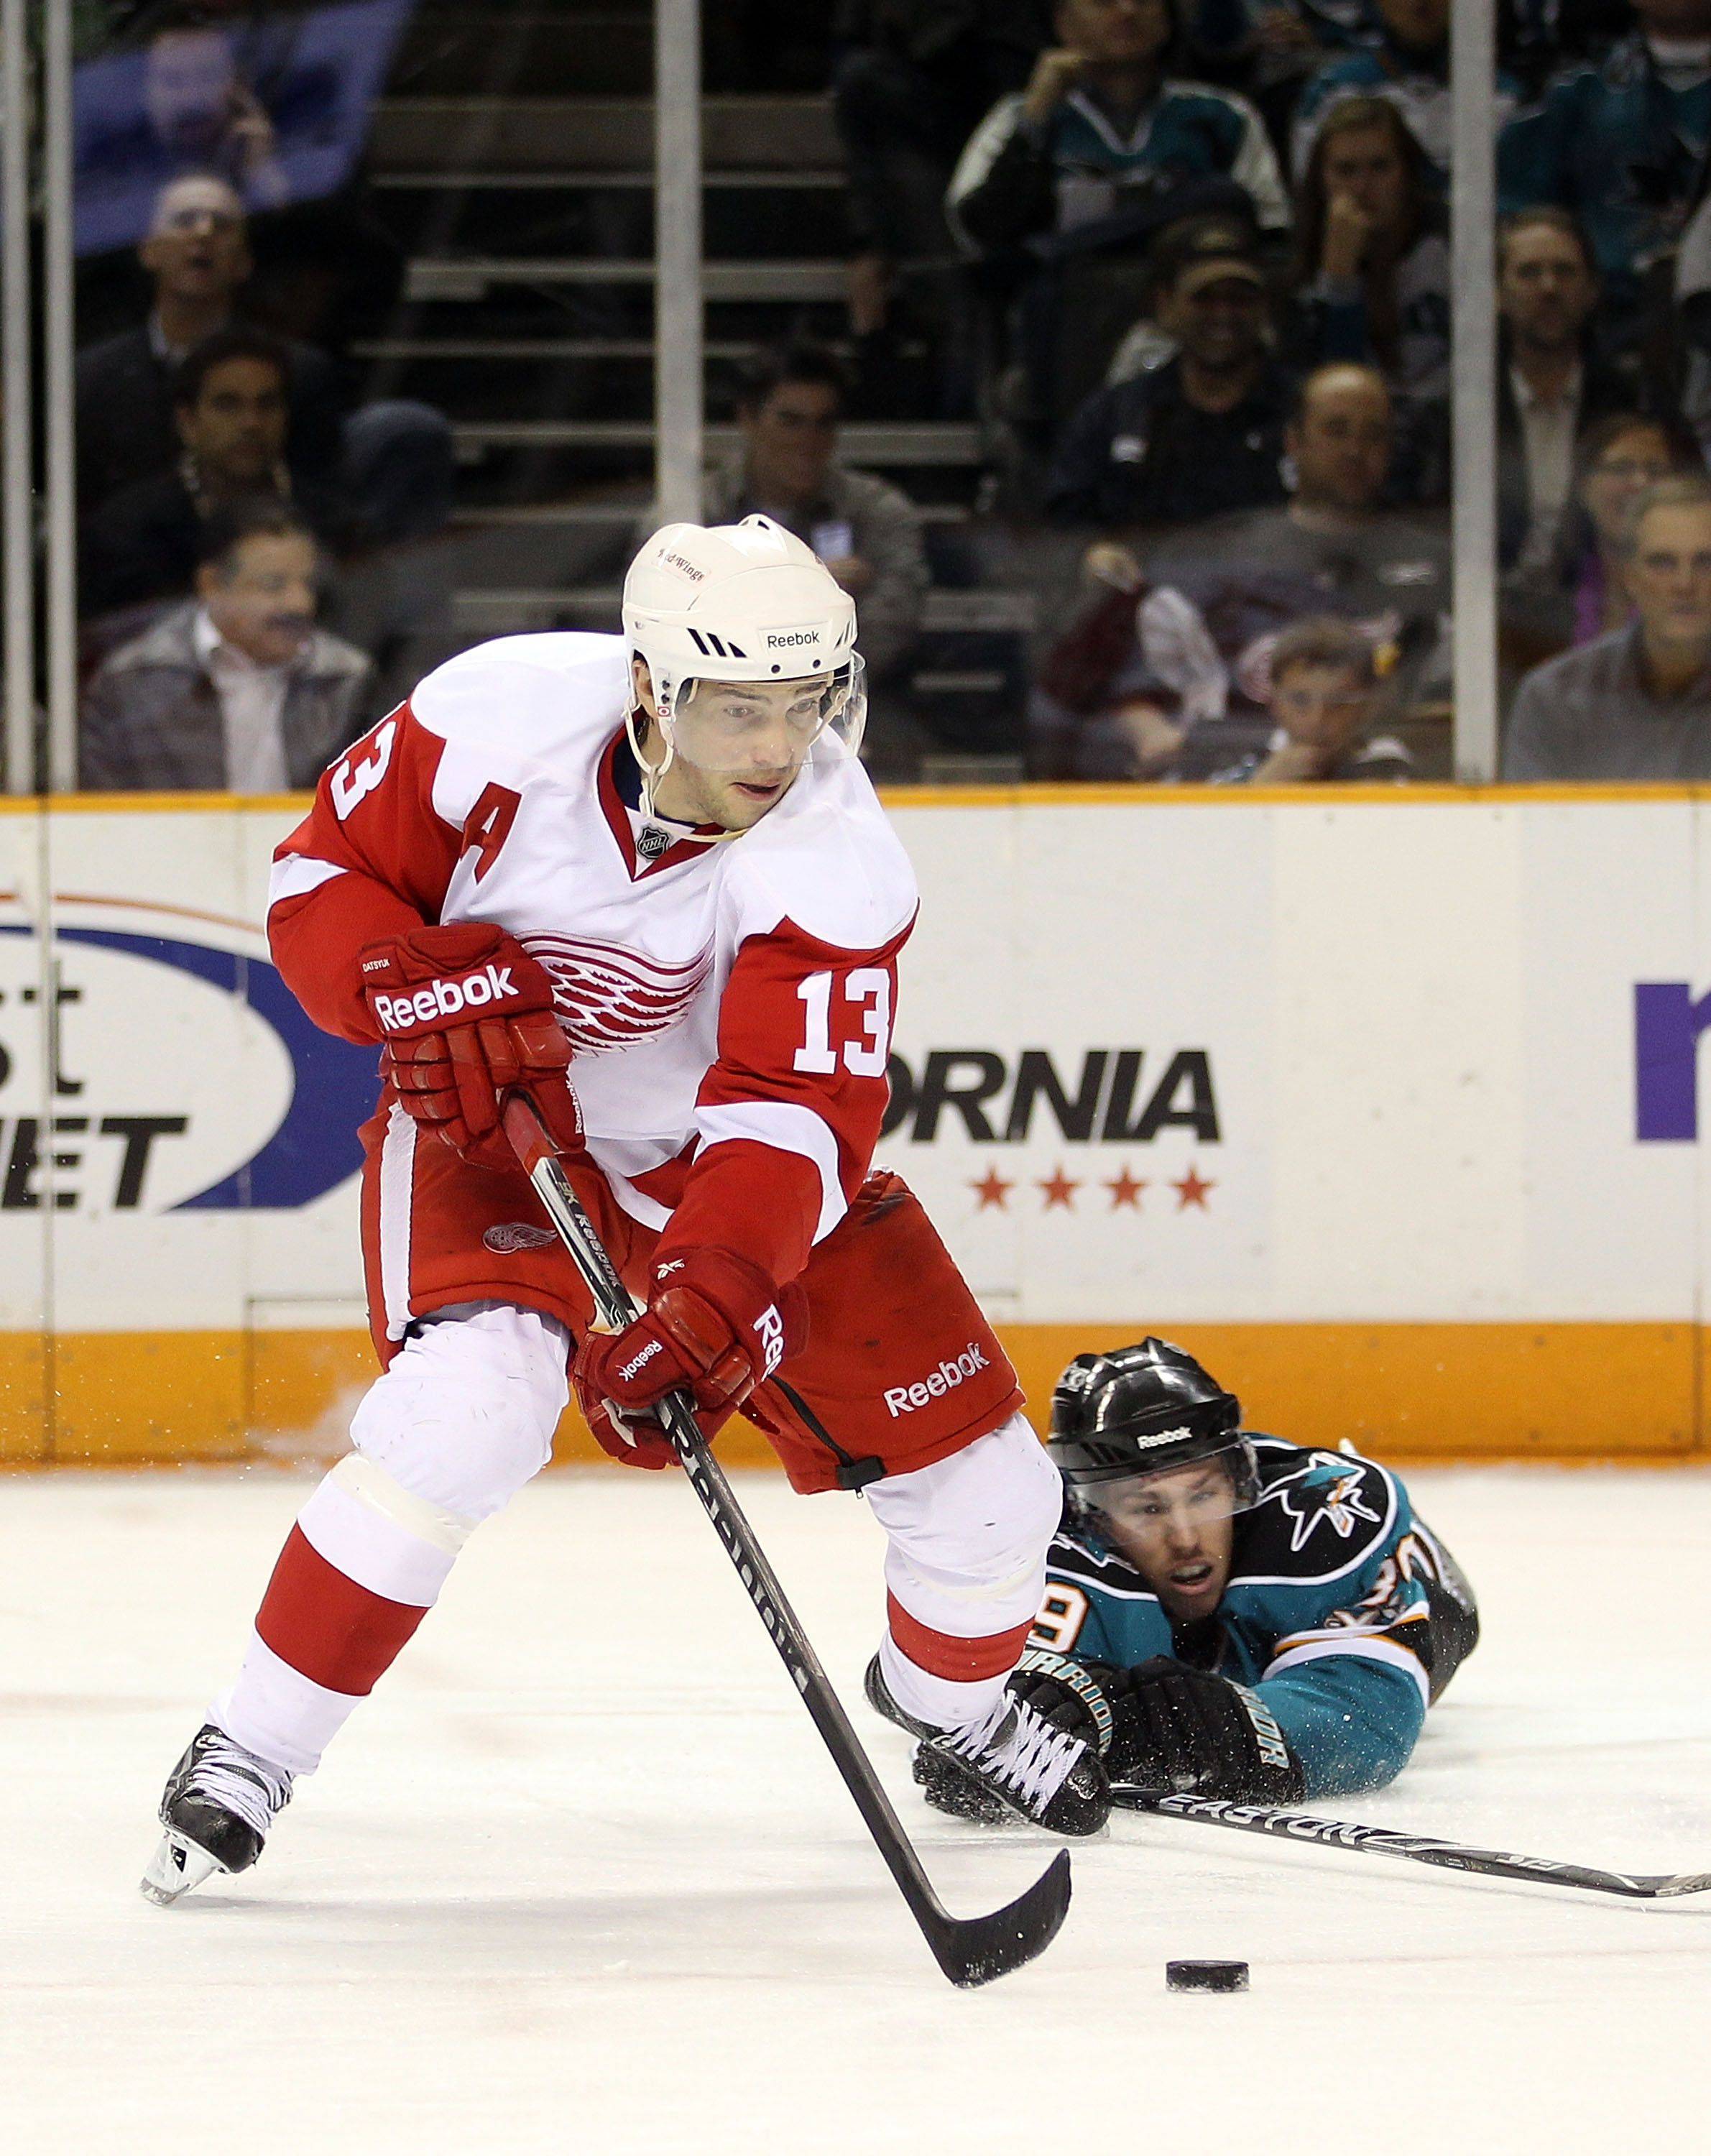 SAN JOSE, CA - NOVEMBER 30:  Pavel Datsyuk #13 of the Detroit Red Wings and Logan Couture #39 of the San Jose Sharks go for the puck at HP Pavilion on November 30, 2010 in San Jose, California.  (Photo by Ezra Shaw/Getty Images)